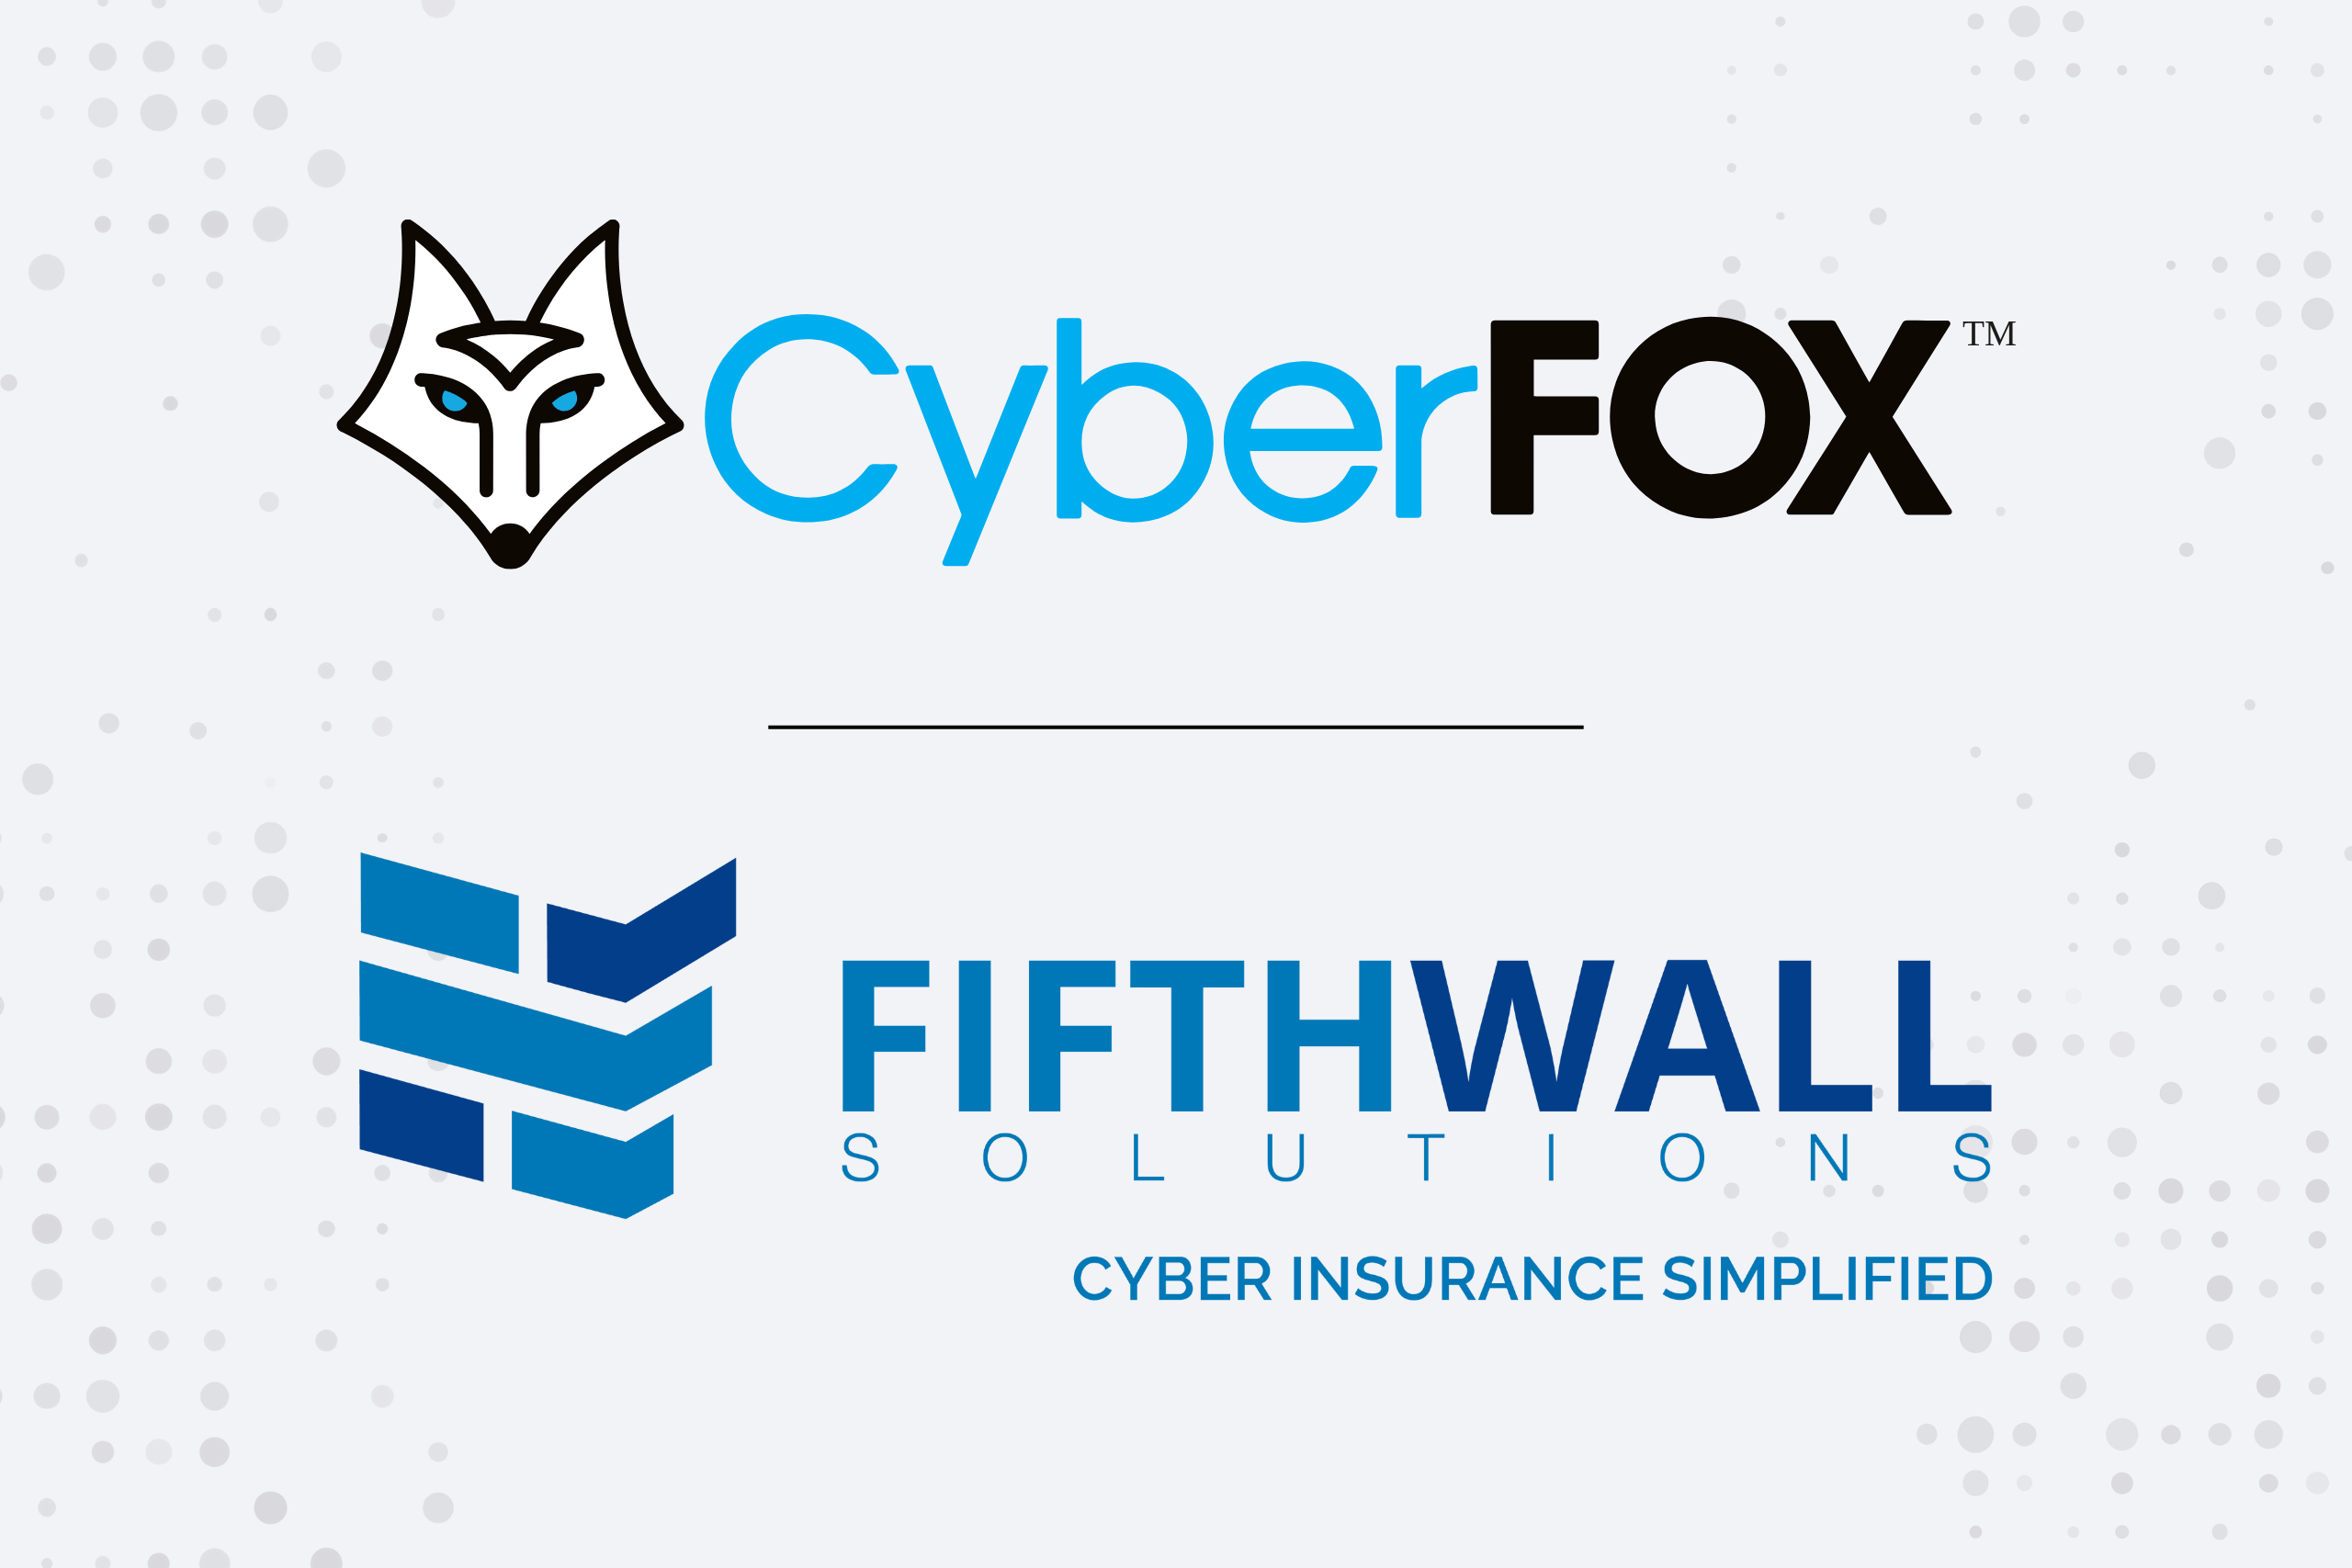 CyberFOX and FifthWall Solutions Optimize Cyber Insurance Renewal Process